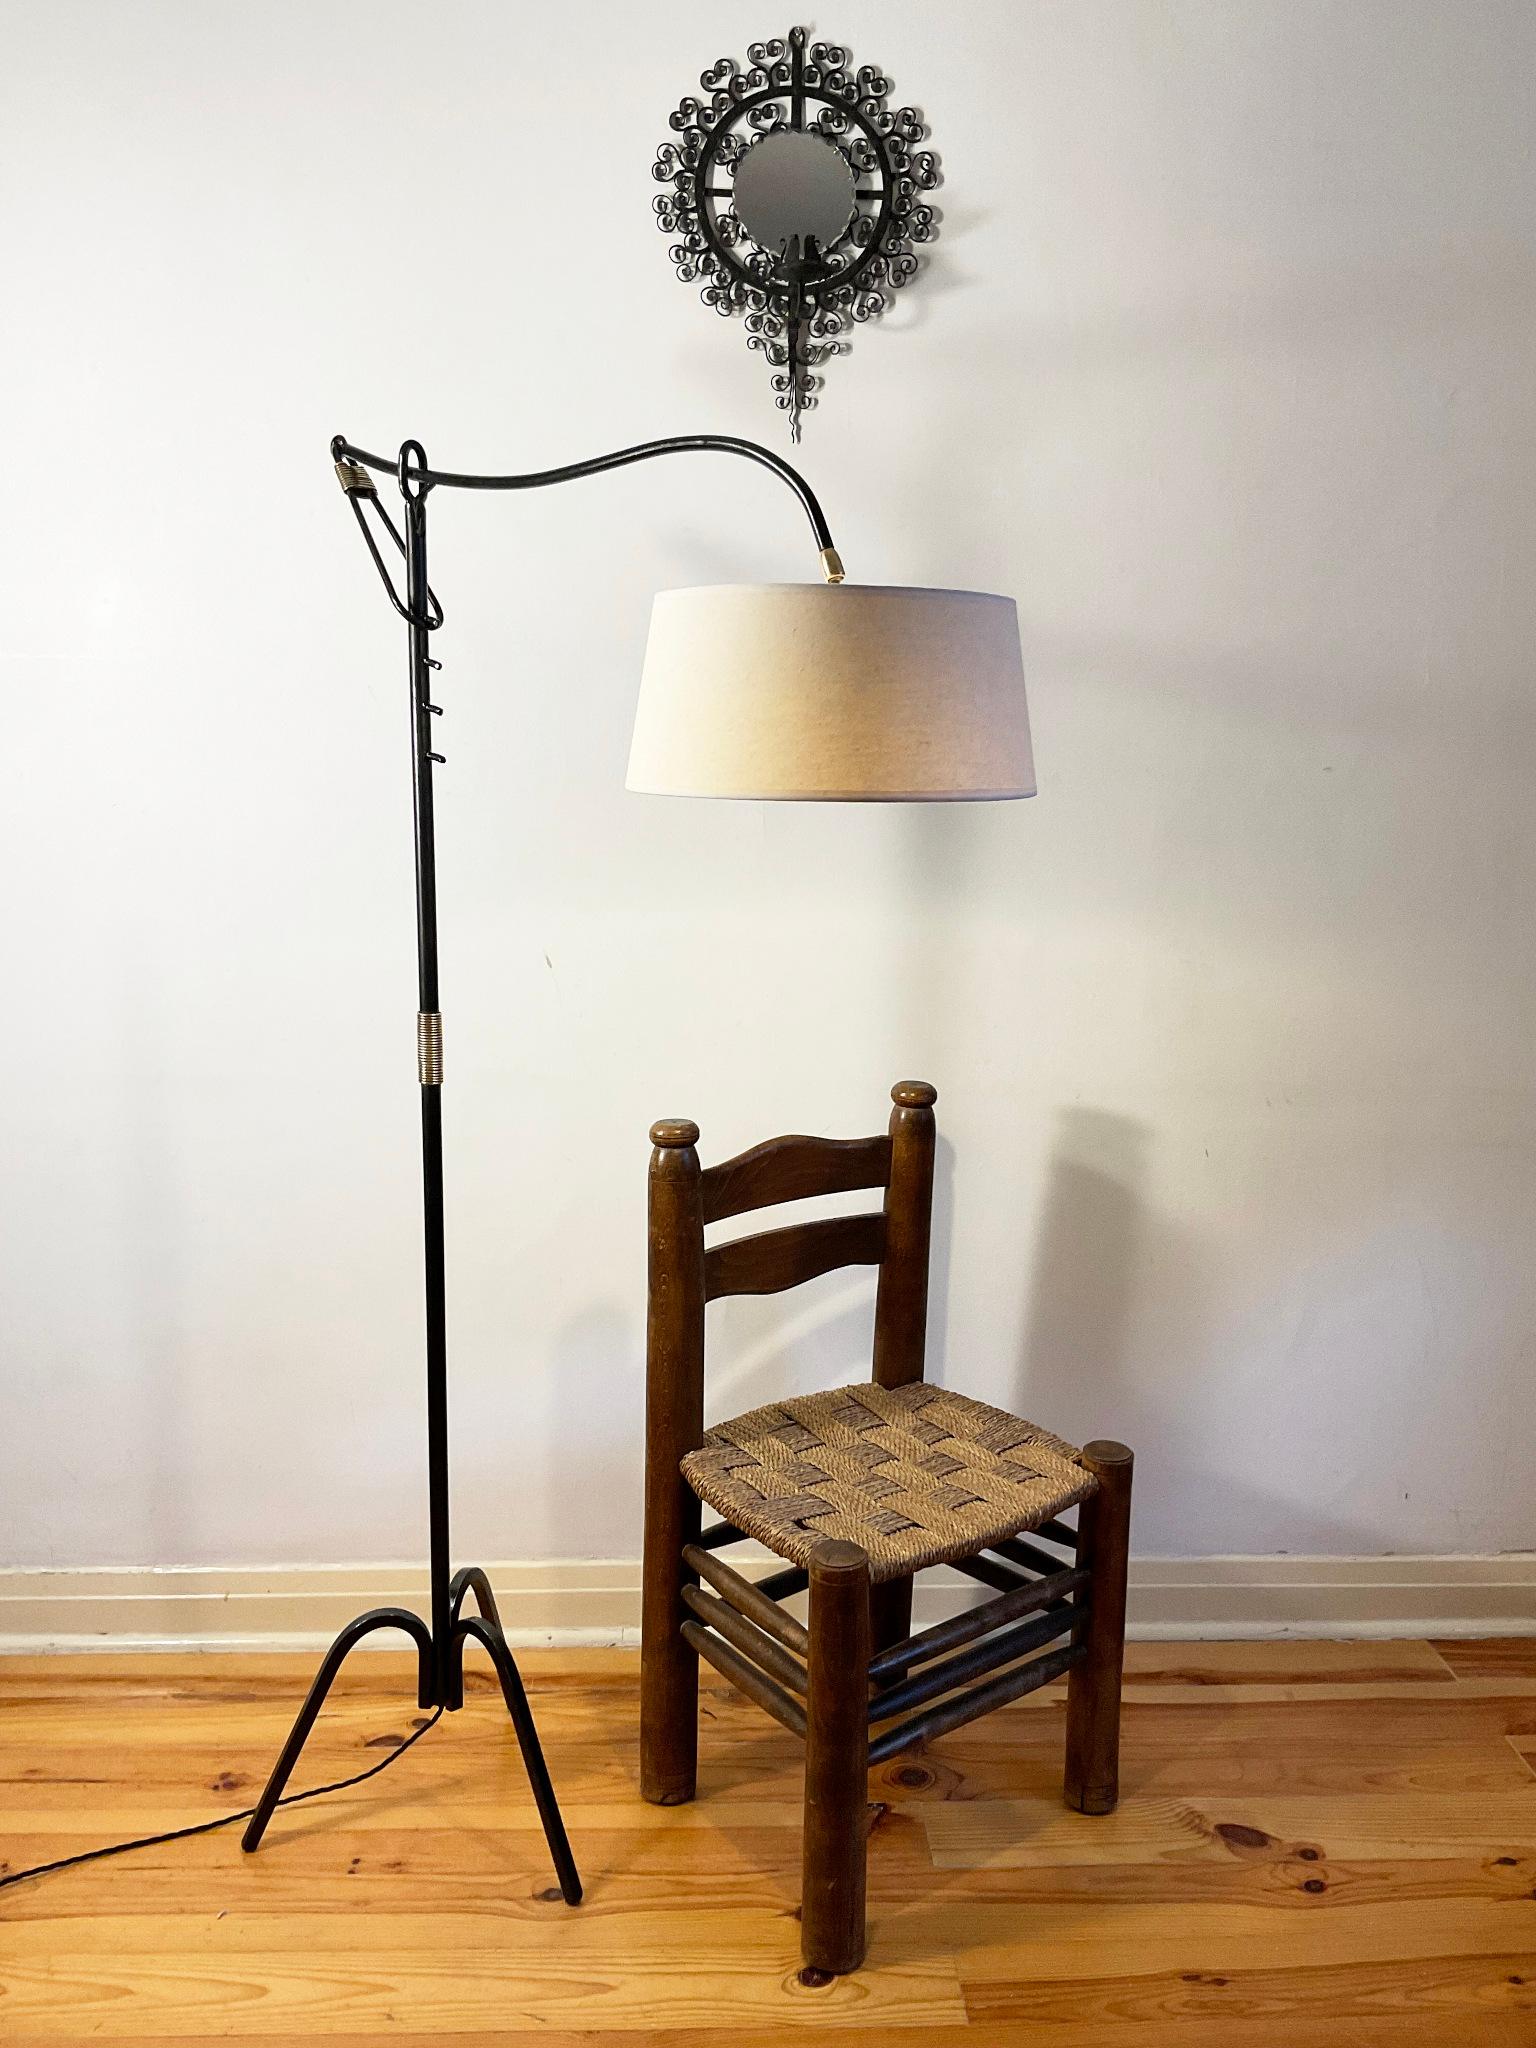 Metalwork 1950s Floor Lamp Attributed to Jacques Adnet with a Crémallière system For Sale